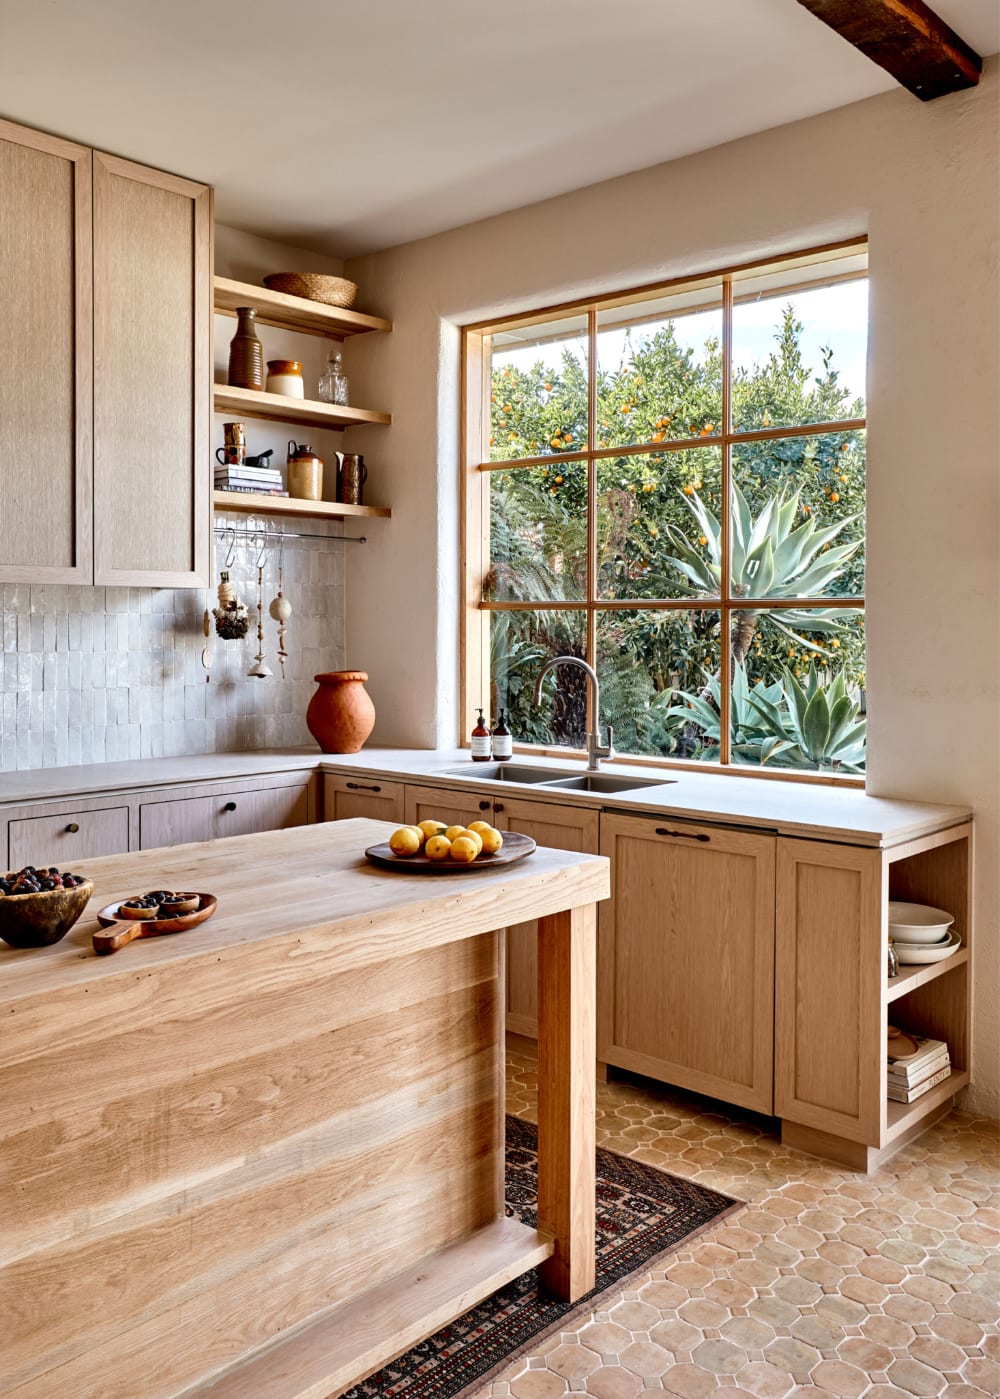 A Star Modern-Rustic Kitchen in Melbourne: Australian House and Garden's Kitchen of 2019 by Studio Ezra